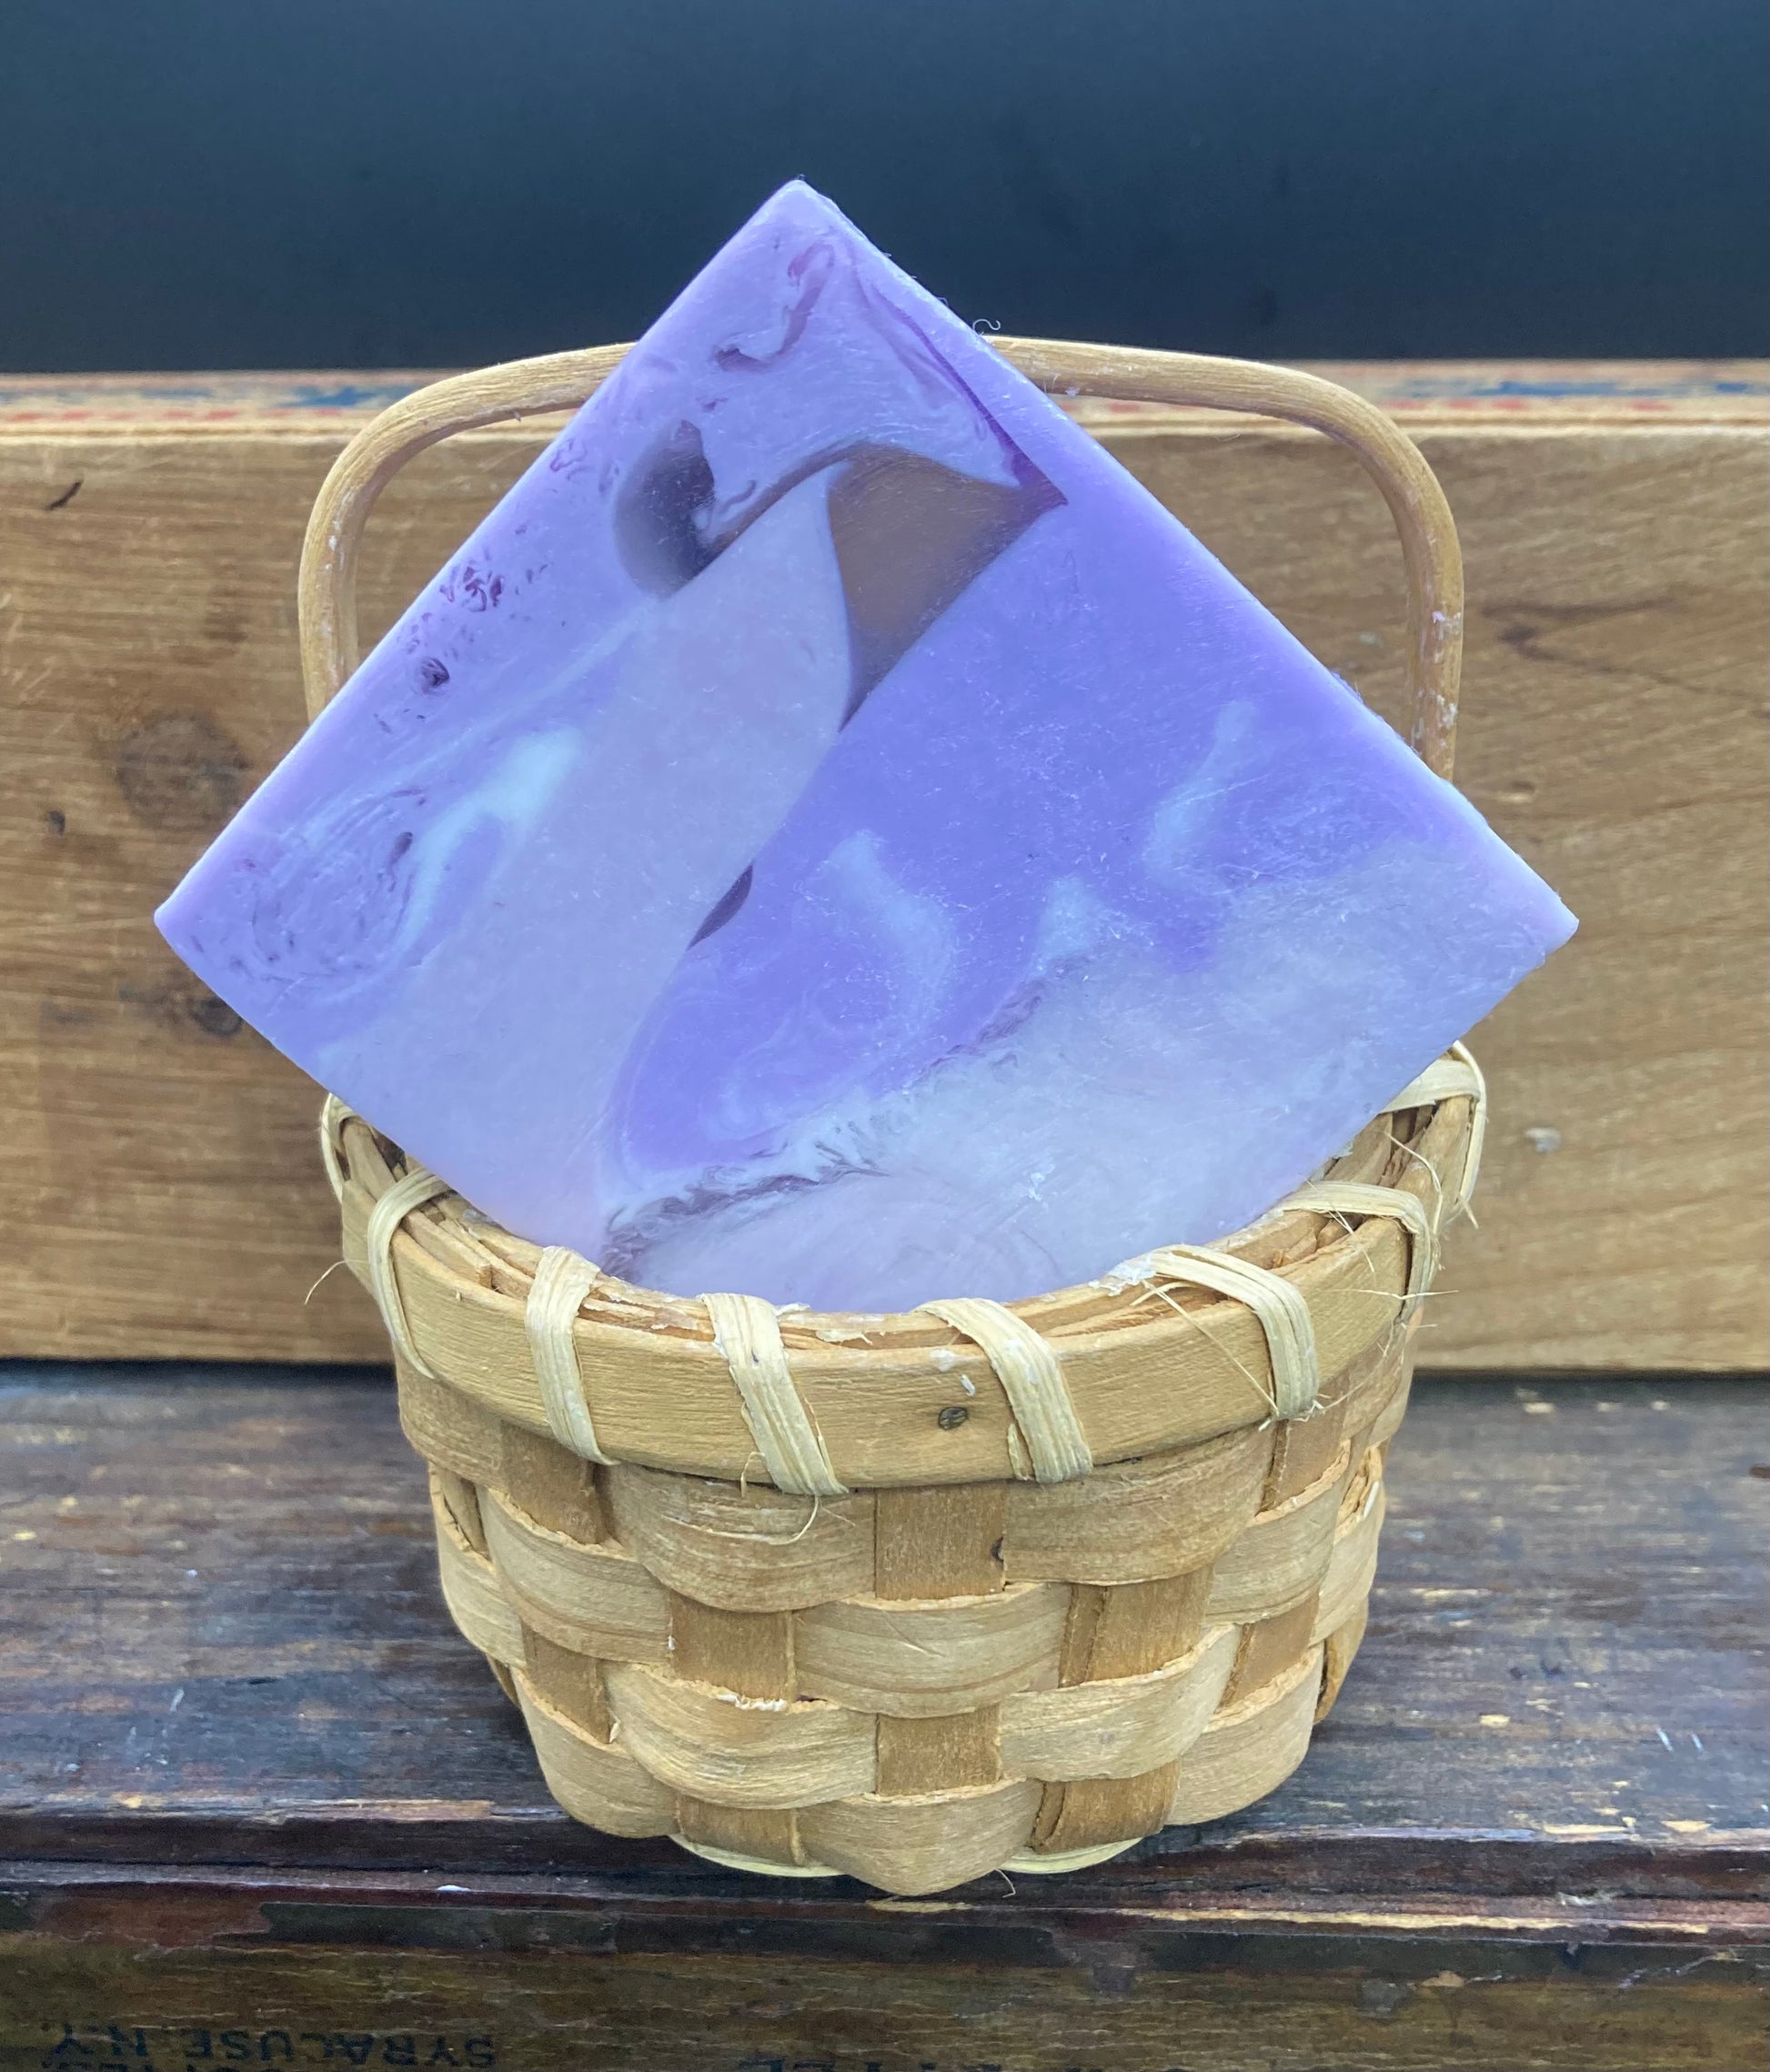  This is a 4 oz bar of Black Raspberry Vanilla  scented Goats Milk Soap.  This is a classic scent in a moisturizing bar of soap.  It makes bathtime a spa-like experience!